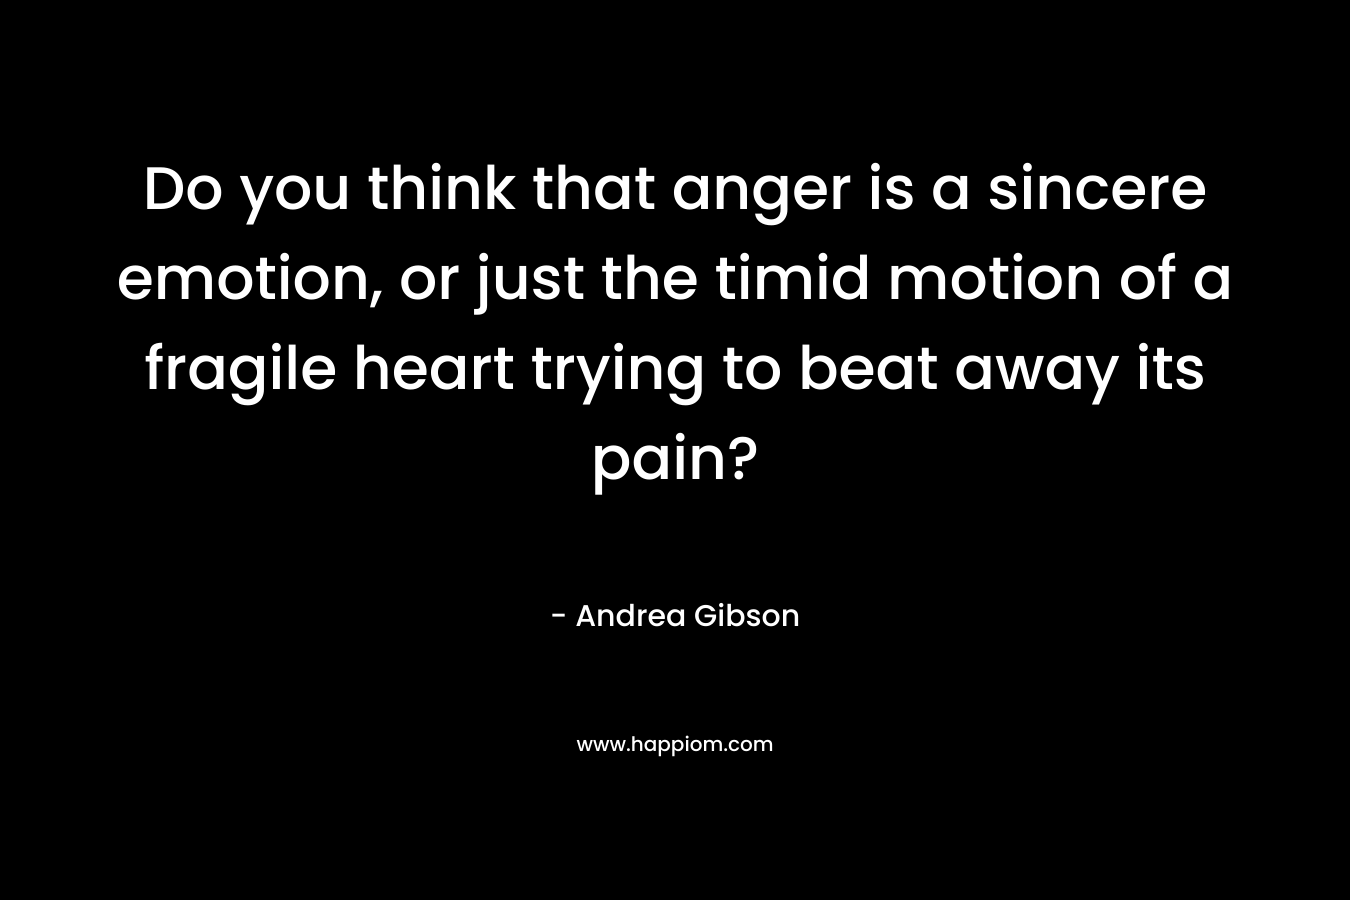 Do you think that anger is a sincere emotion, or just the timid motion of a fragile heart trying to beat away its pain?